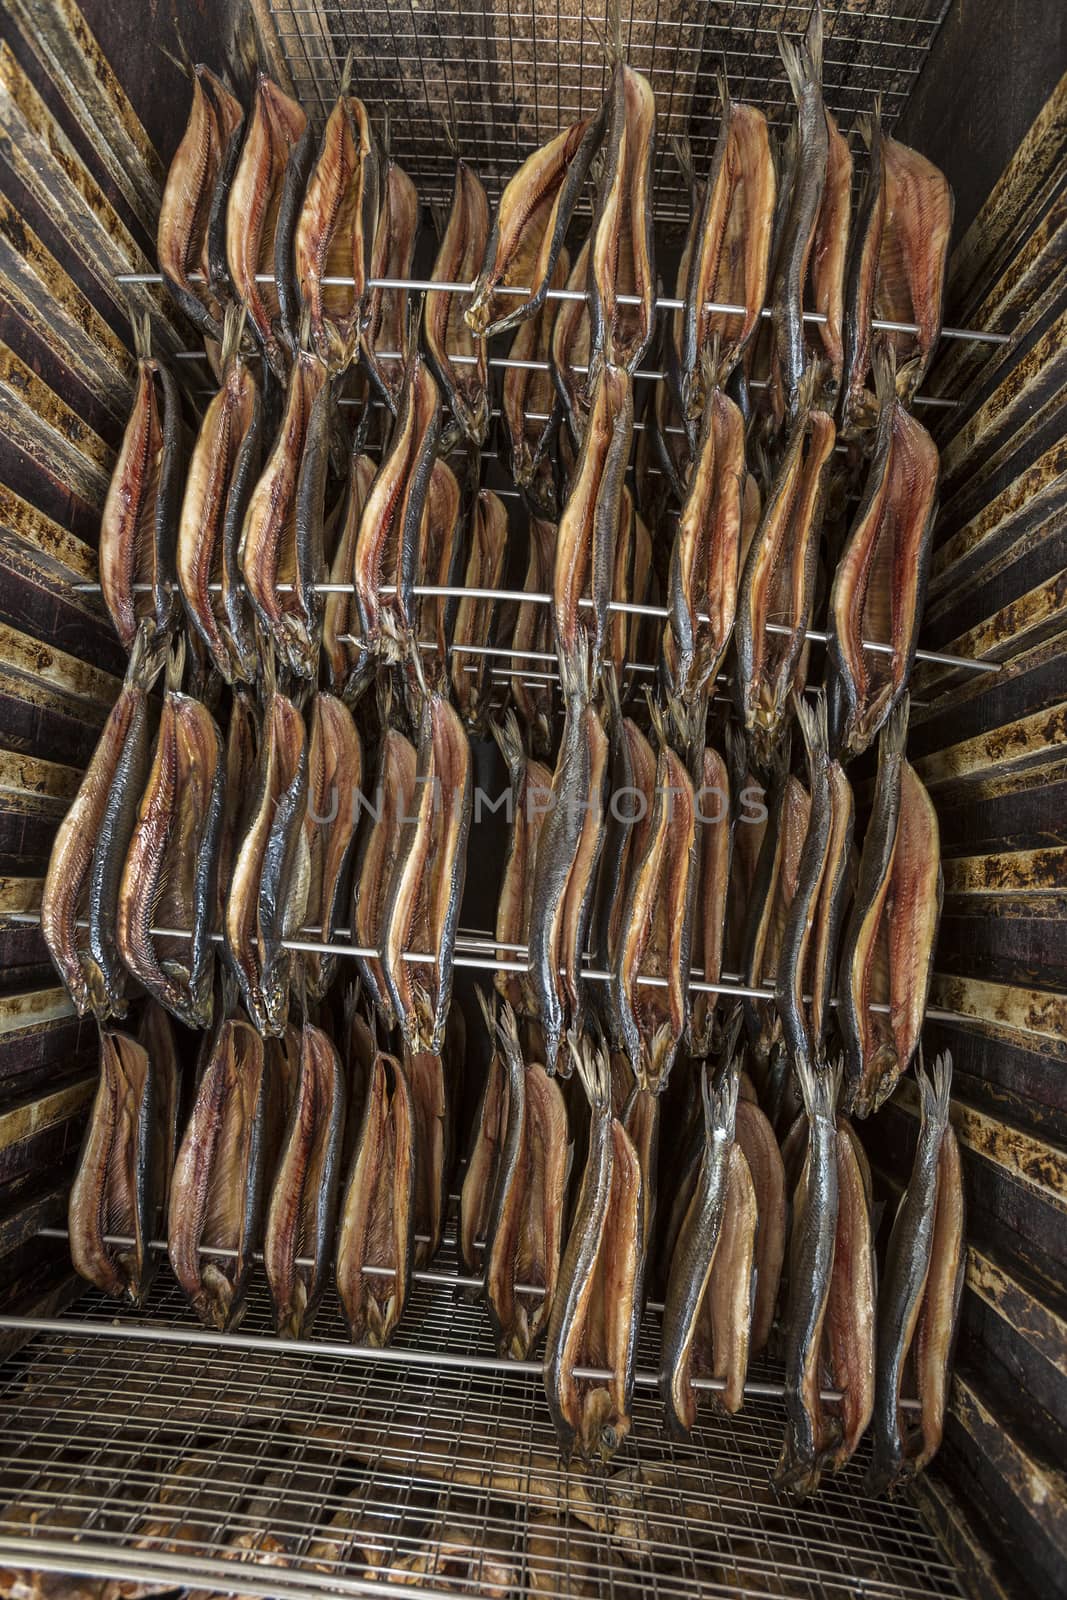 Smoked fish - fish that has been cured by smoking. Foods have been smoked by humans throughout history. Originally this was done as a preservative. In more recent times smoking of fish is generally done for the unique taste and flavor.